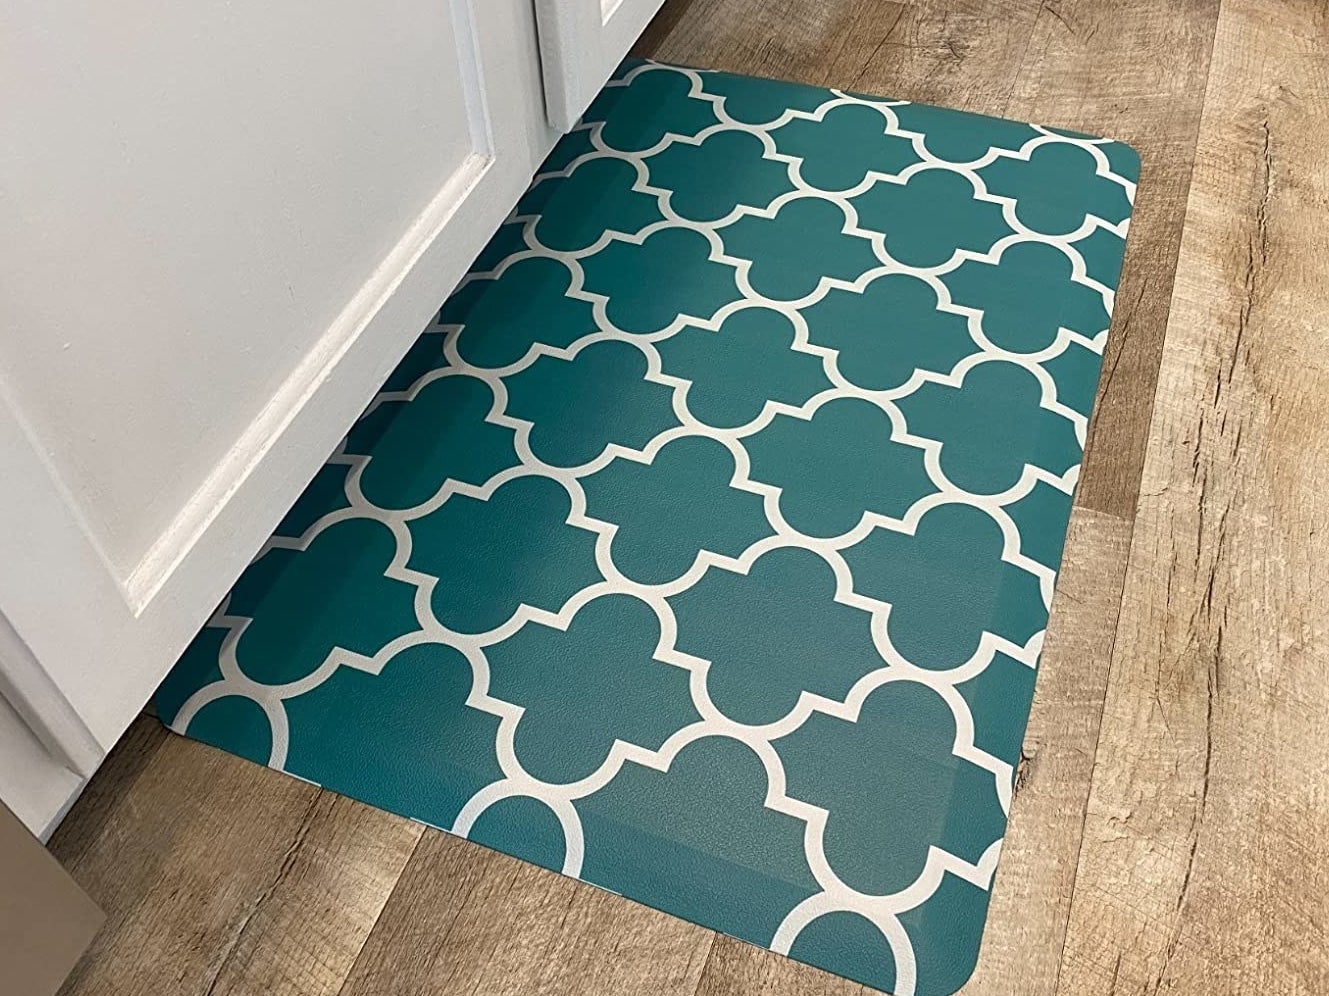 Reviewer photo of the kitchen mat on a hardwood floor